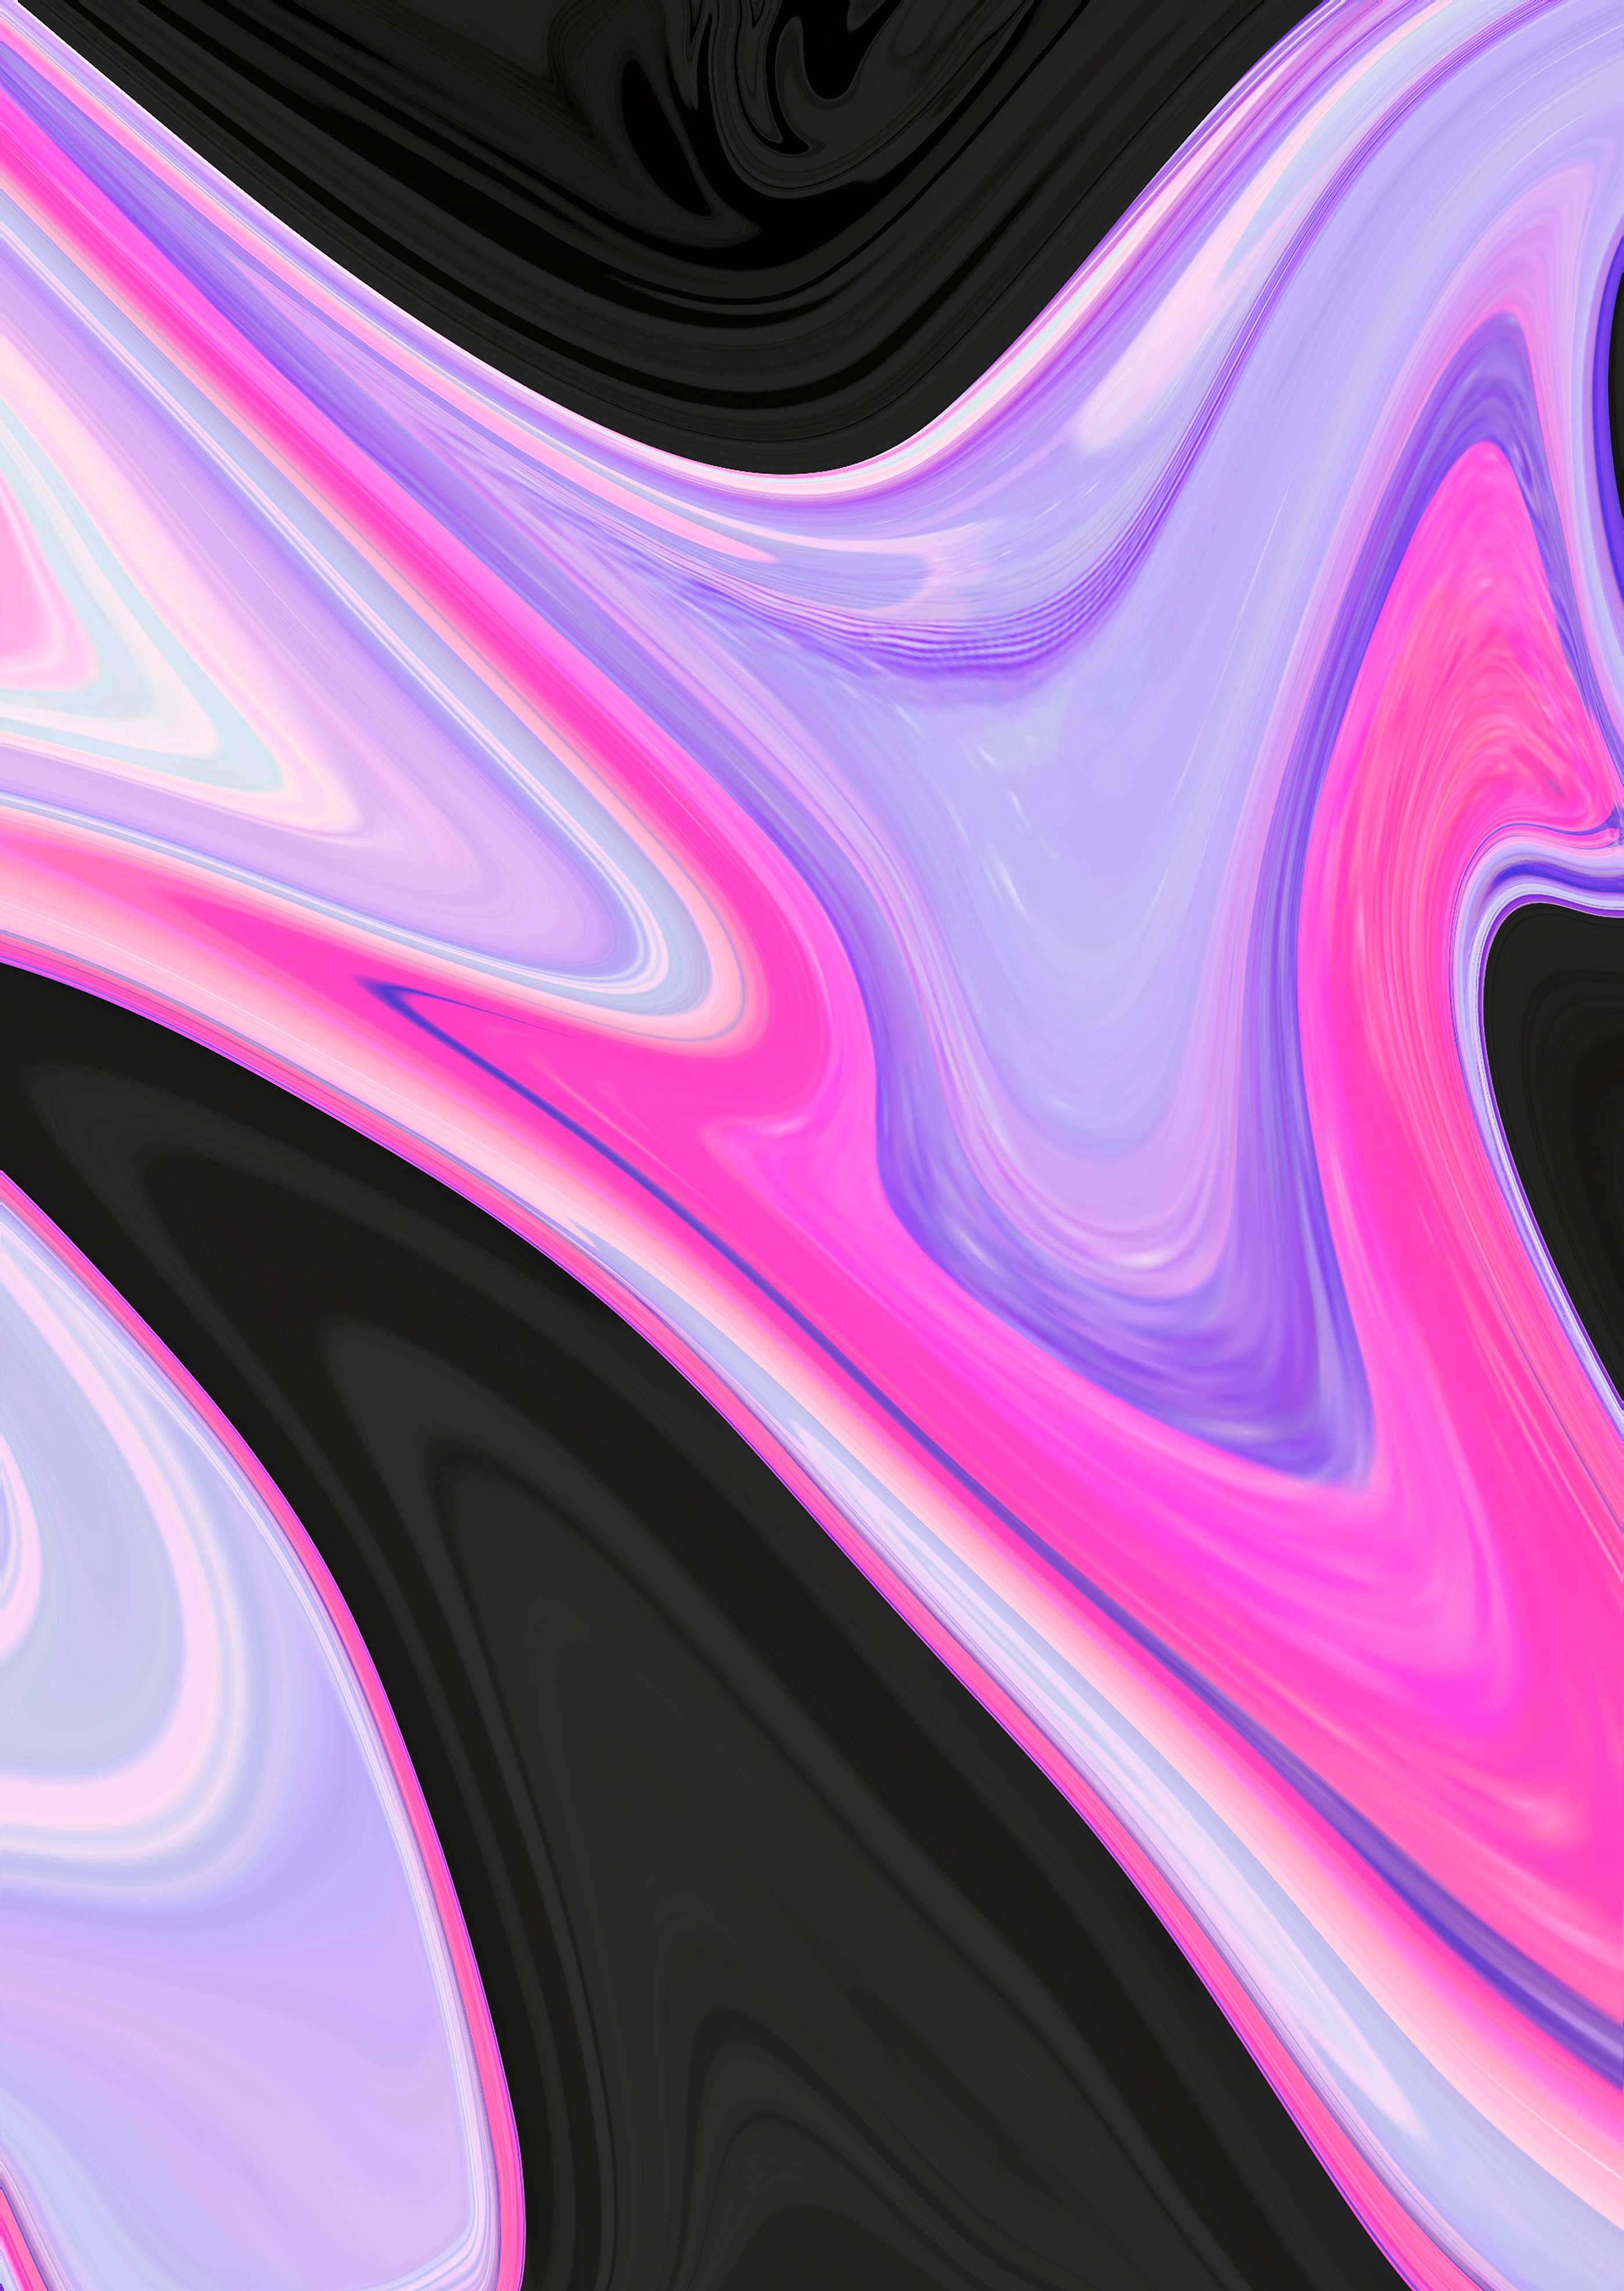 wavy, pink, abstract, black, lines, lilac, paint Full HD